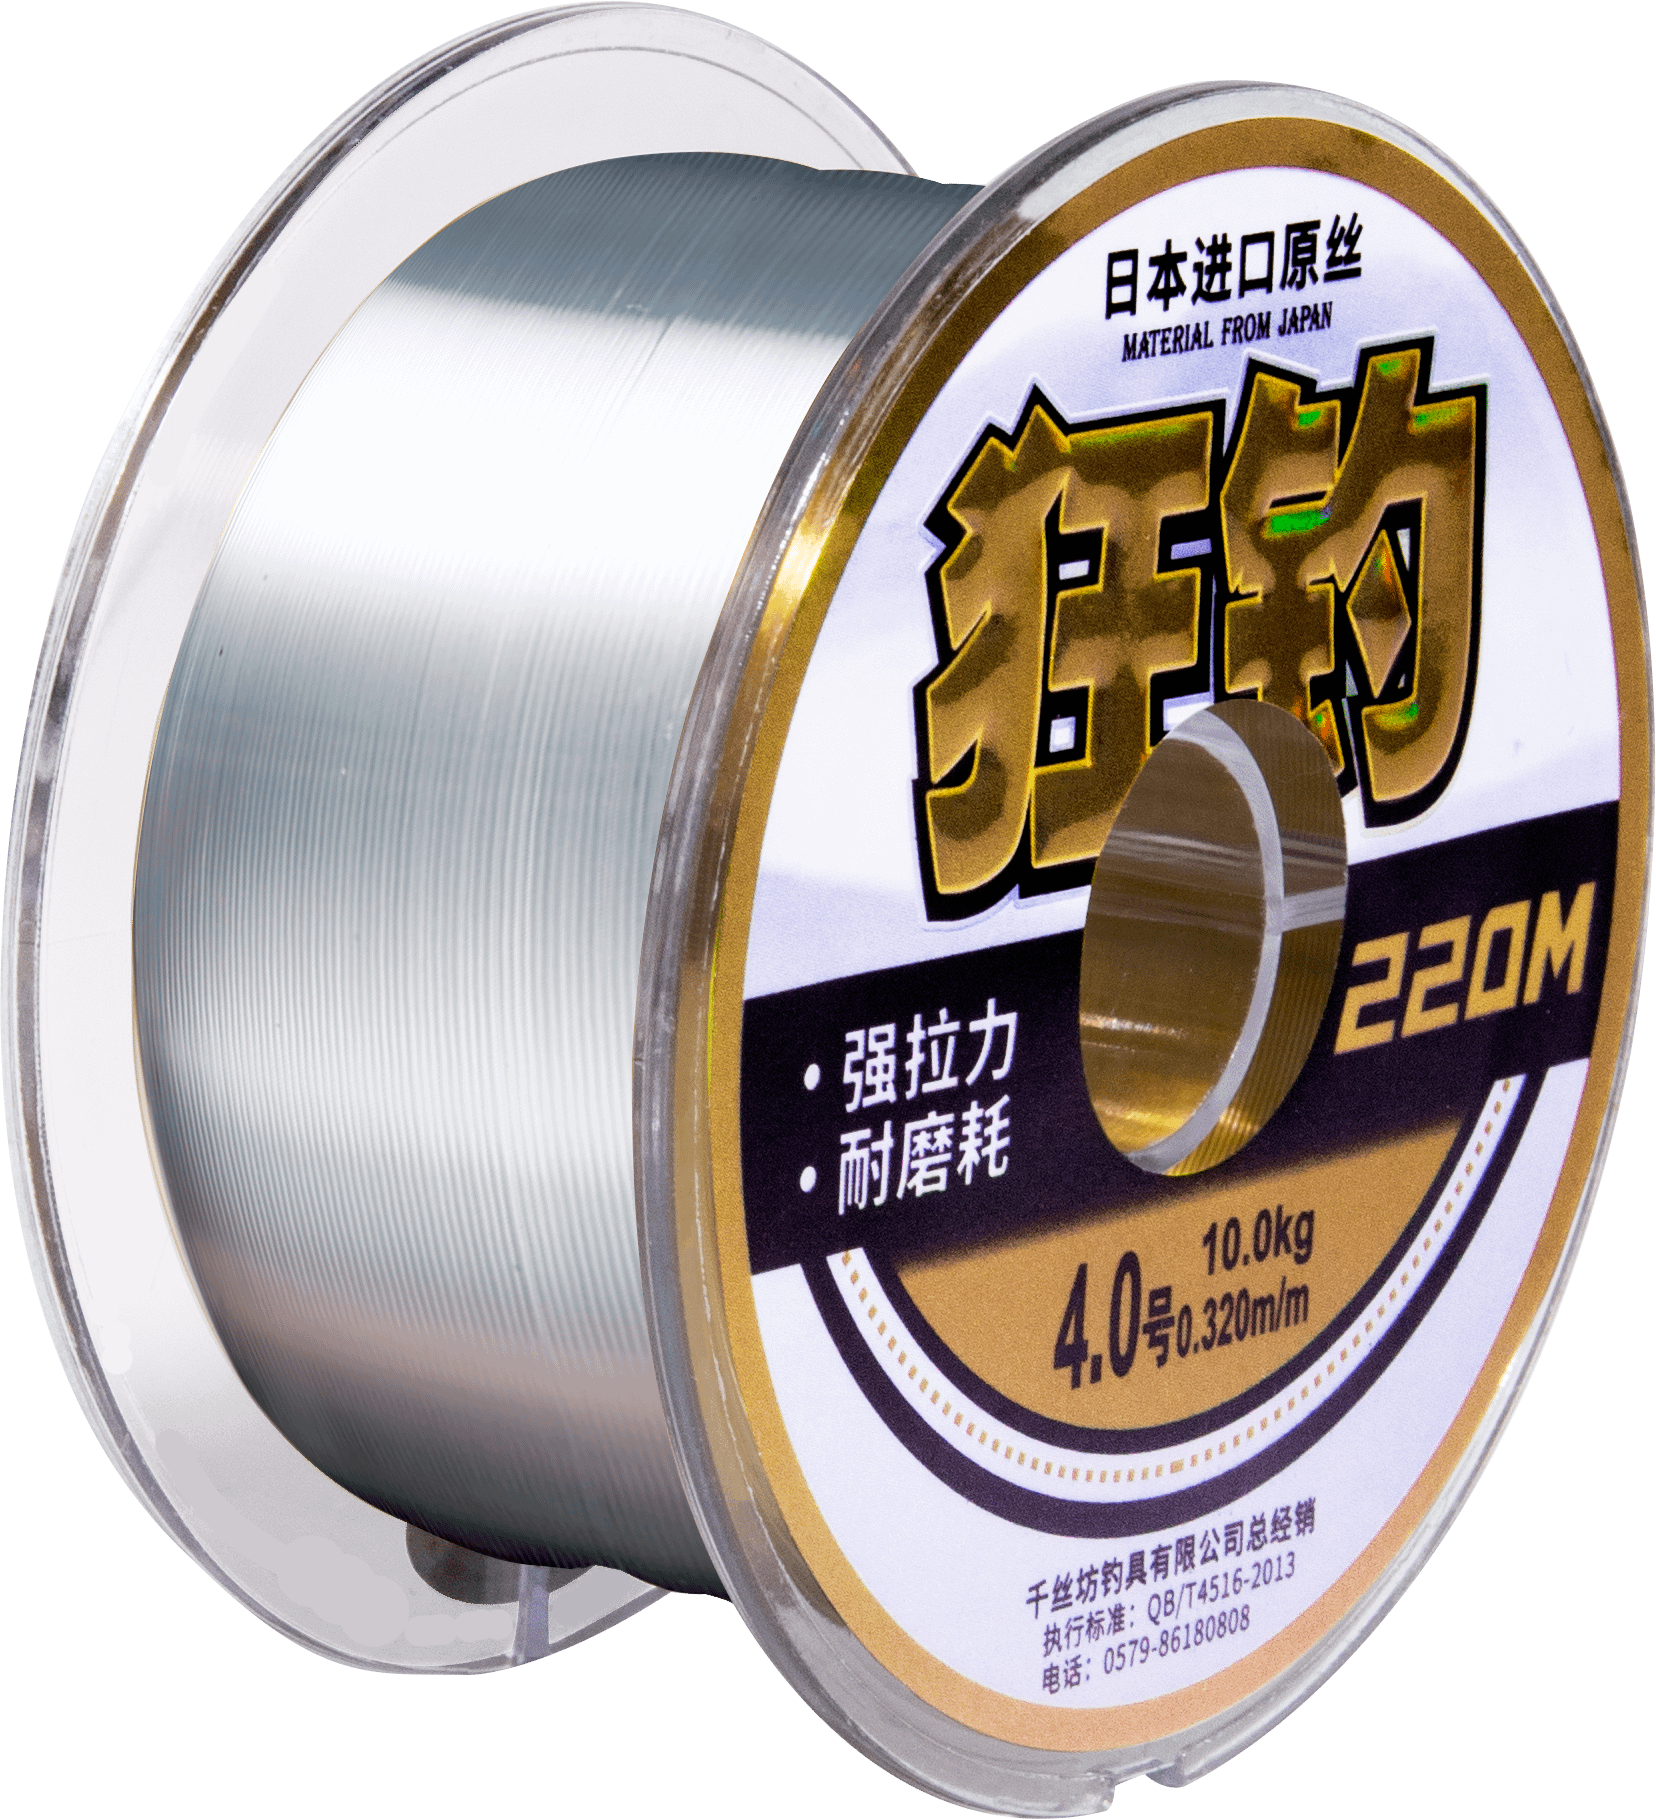 braided fishing line factory, braided fishing line factory Suppliers and  Manufacturers at